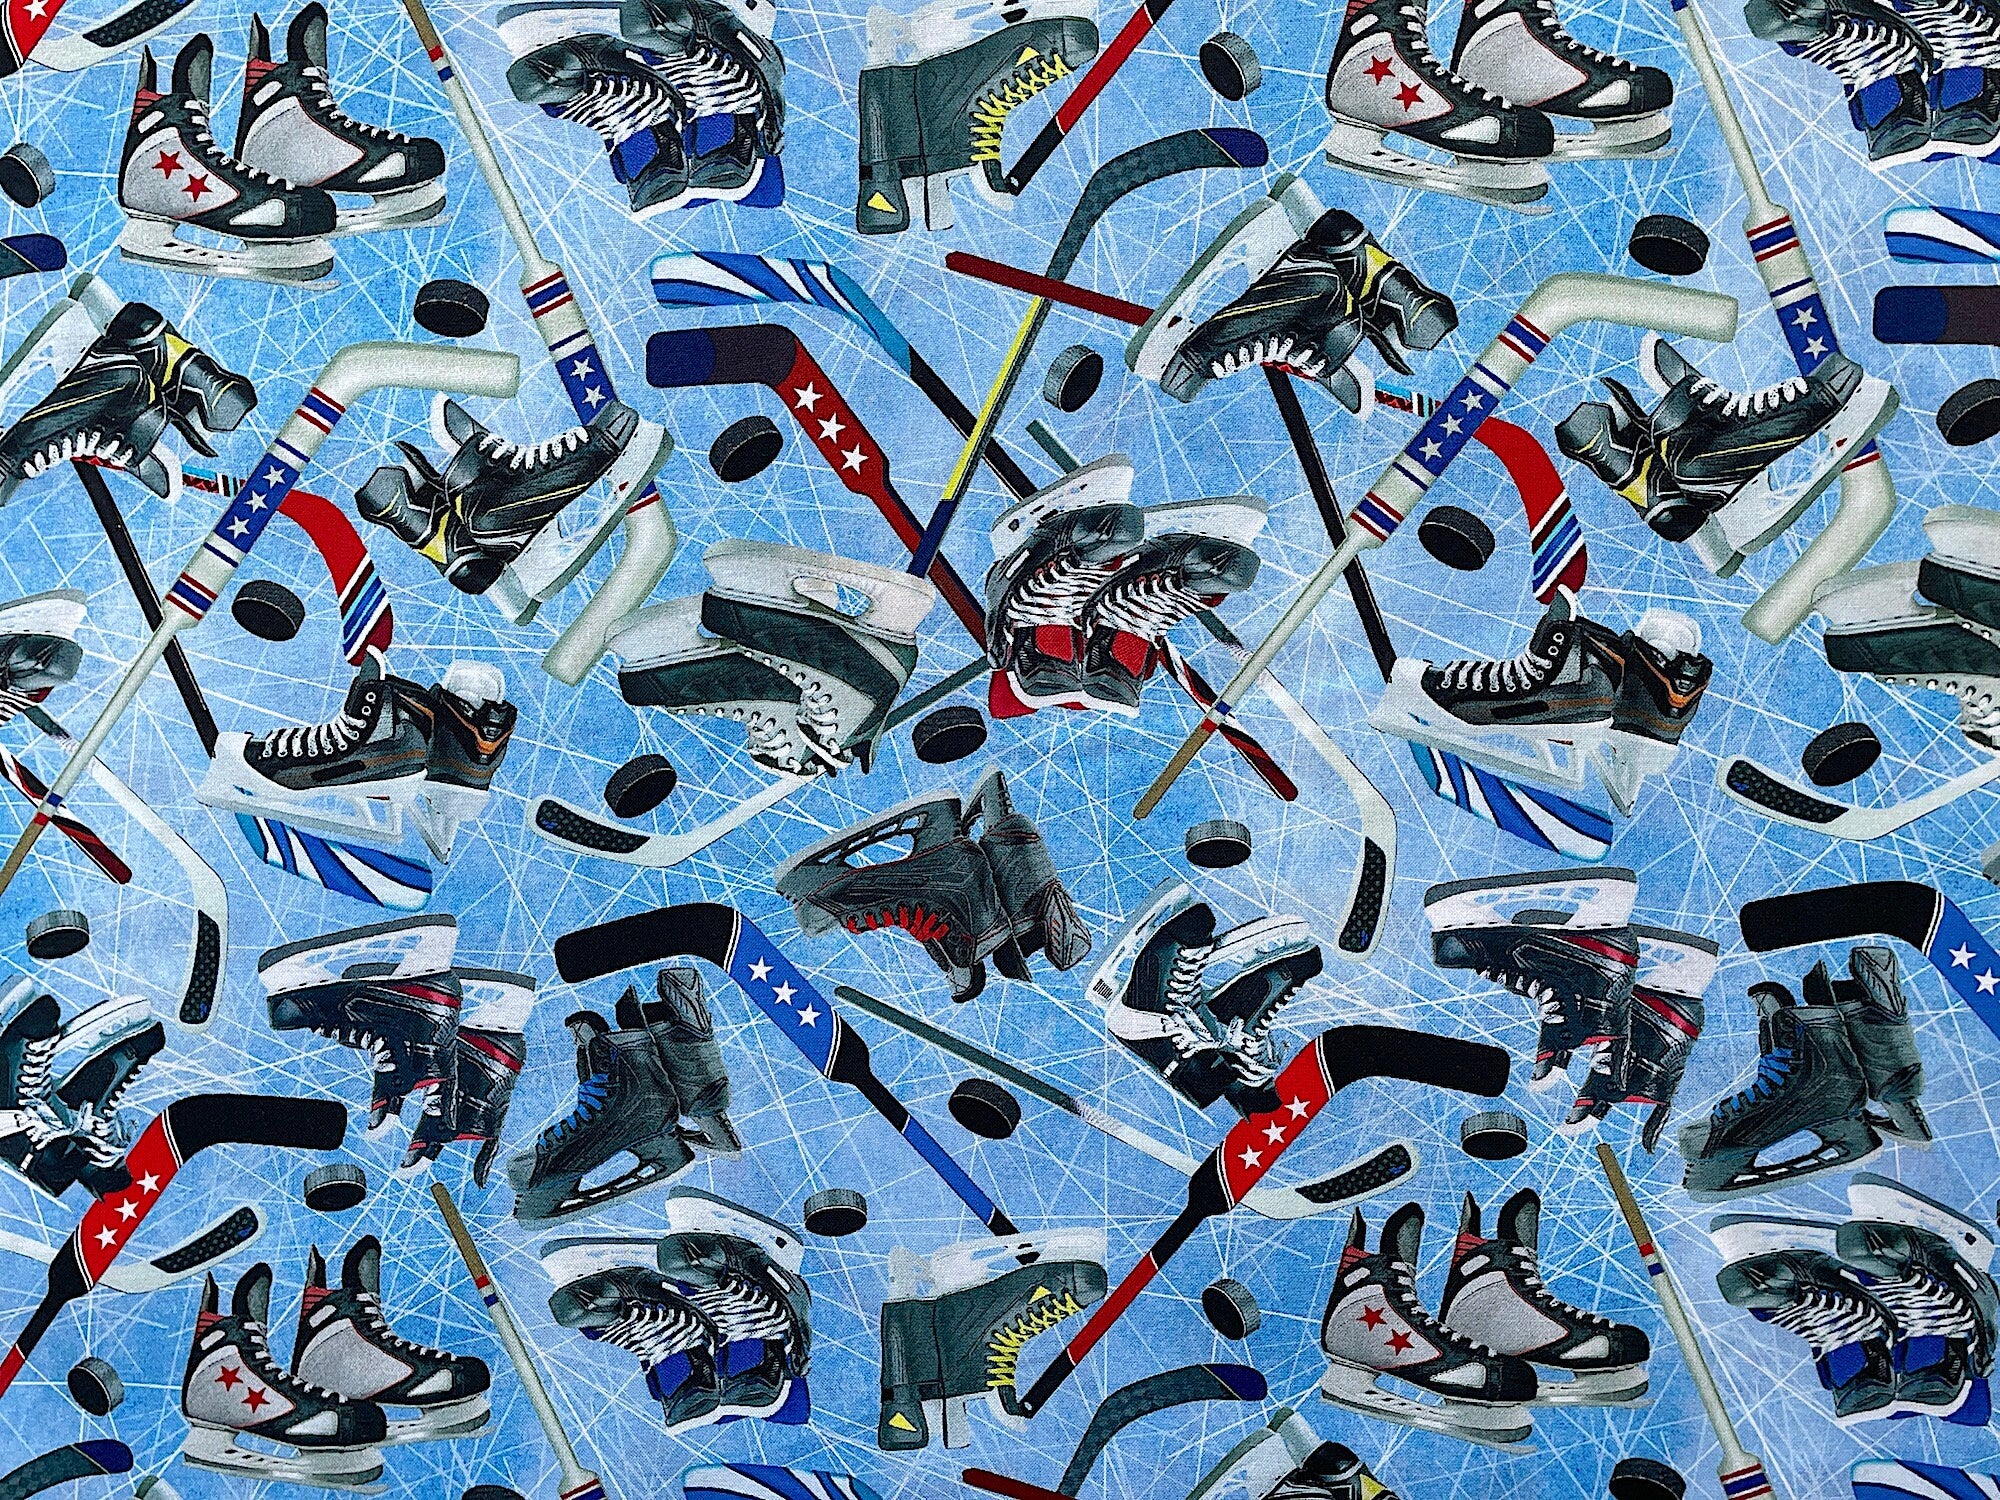 Blue fabric covered with ice skates, hockey sticks and pucks.